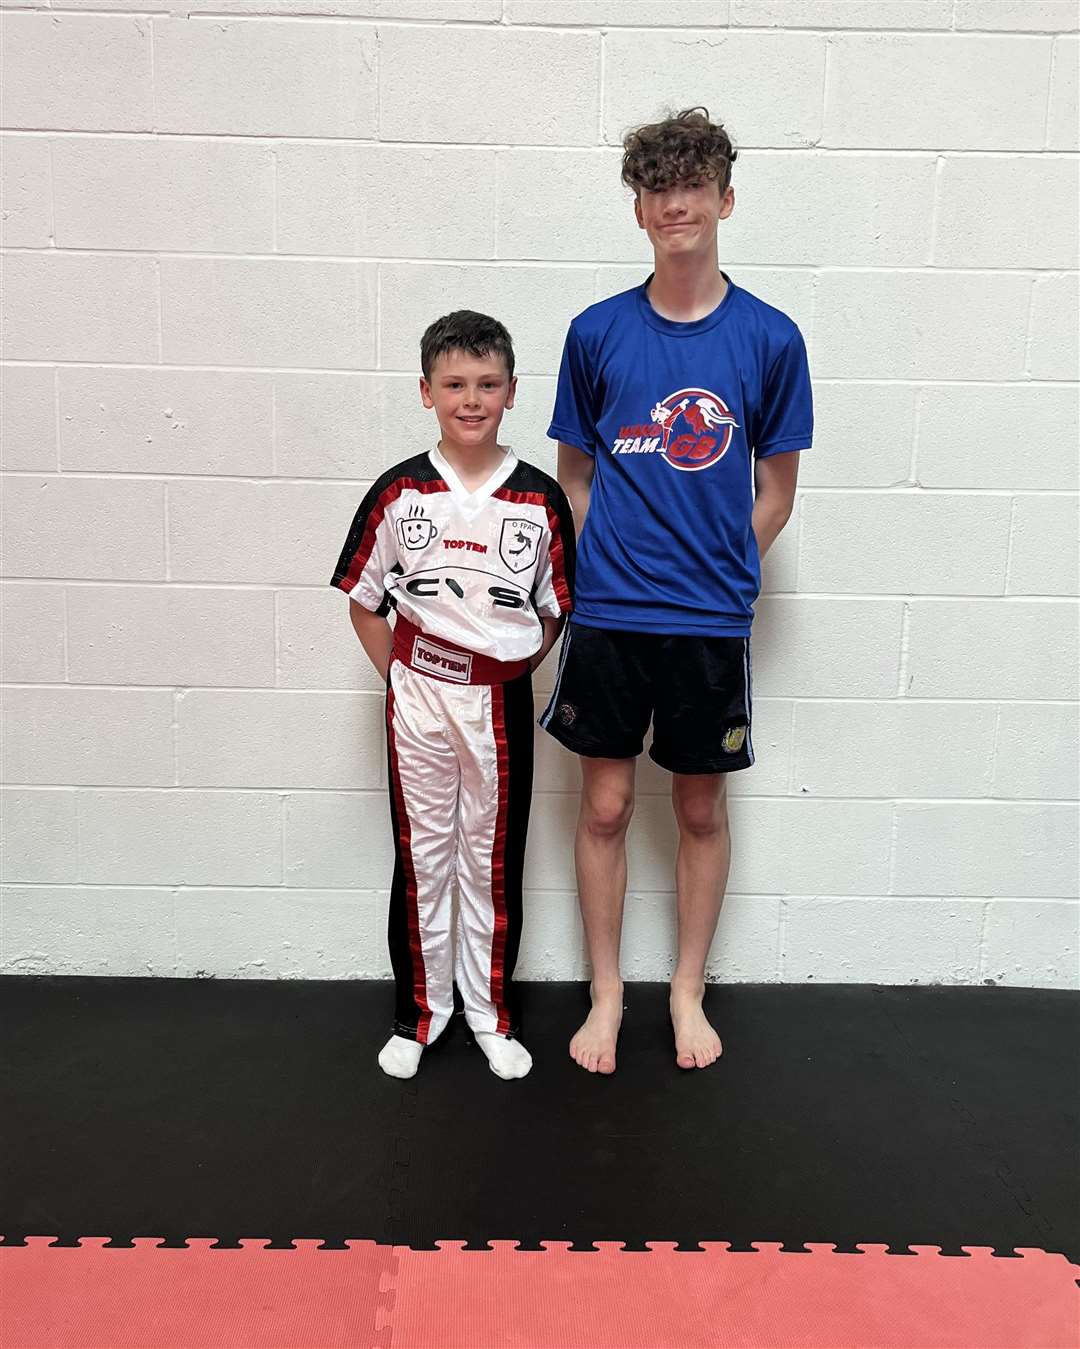 Inverness brothers Ciaran (11) and Aidan (14) Lennan have been selected to represent Great Britain at the WAKO World Championships in October.